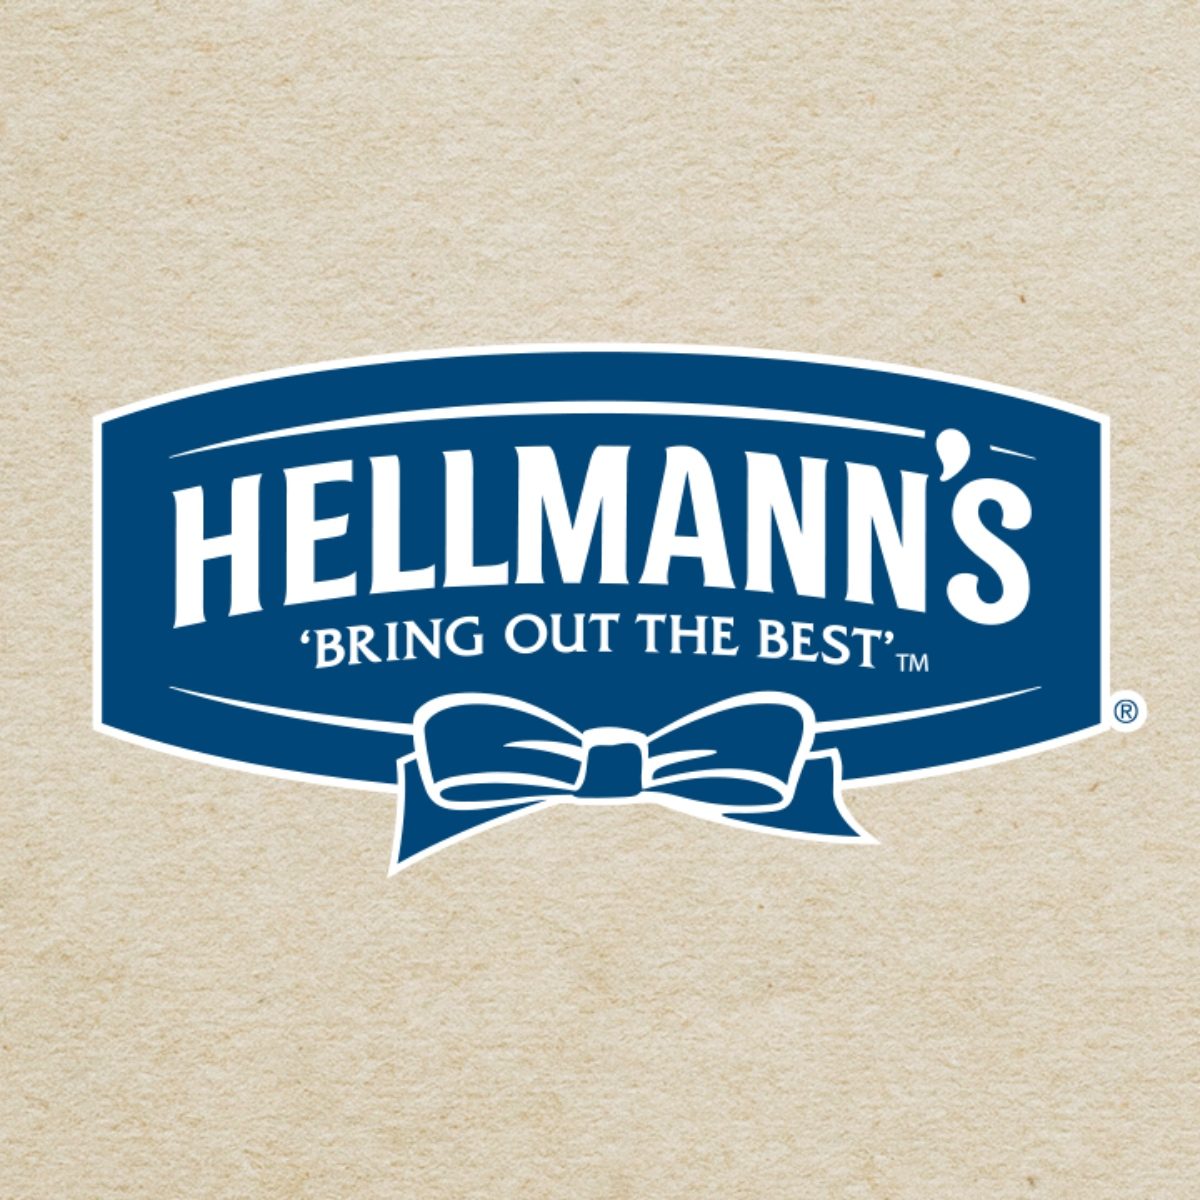 <p><strong><a class="SWhtmlLink" href="https://www.hellmanns.com/us/en/home.html" rel="noopener">Hellmann's</a>, Englewood Cliffs</strong></p> <p>Mayonnaise is pretty a polarizing topic—you either love it or you hate it, and those that dig it have brand loyalty that runs pretty deep. People love Hellmann's because they still make their mayo with three simple ingredients—eggs, vinegar and oil. That's it!</p>